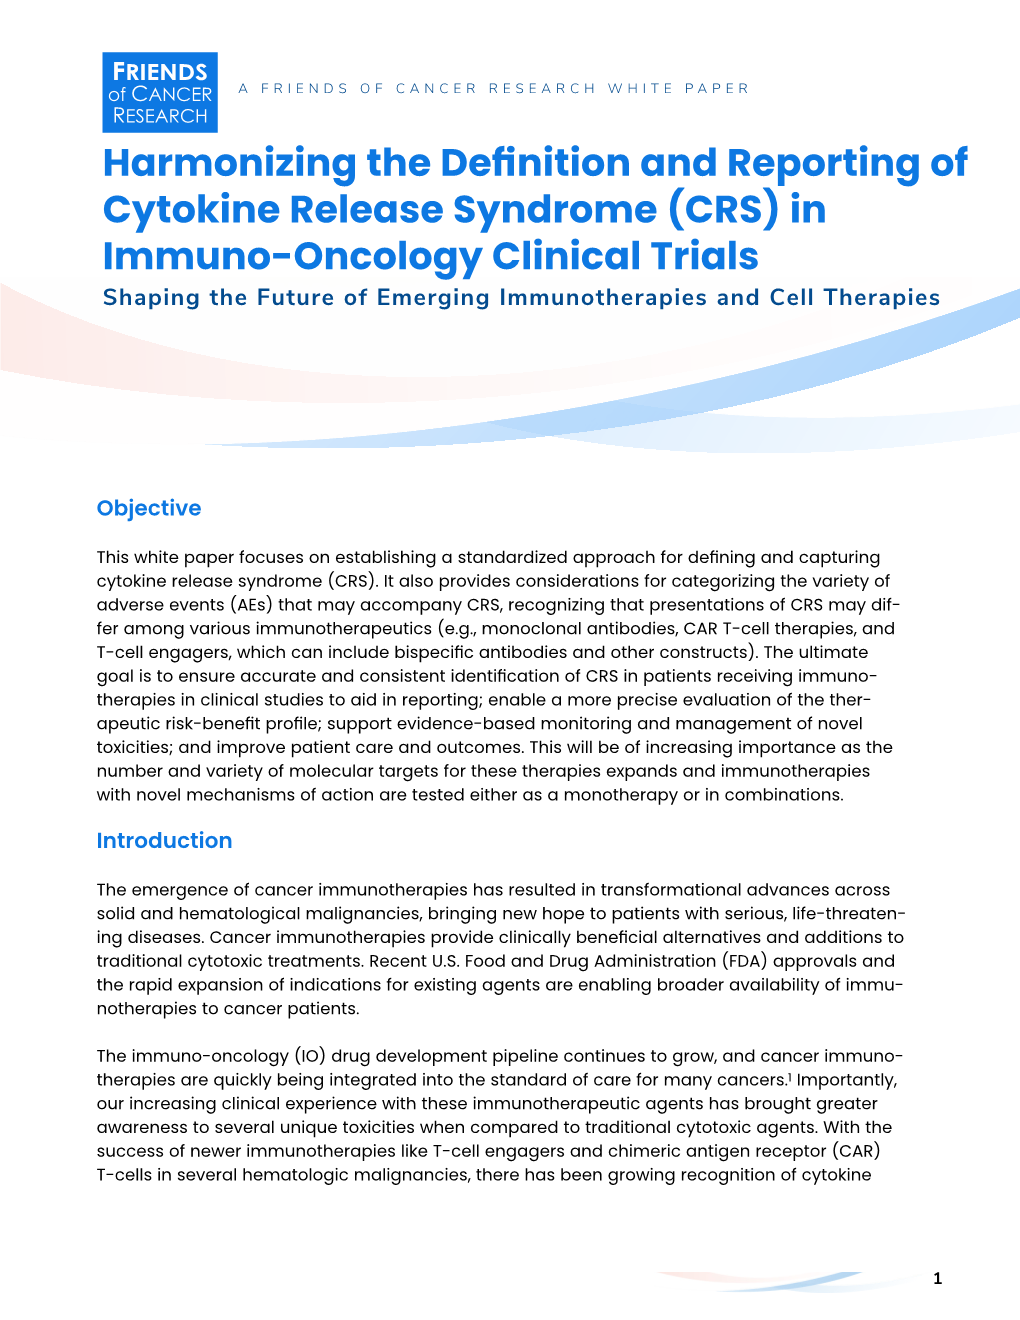 CRS) in Immuno-Oncology Clinical Trials Shaping the Future of Emerging Immunotherapies and Cell Therapies